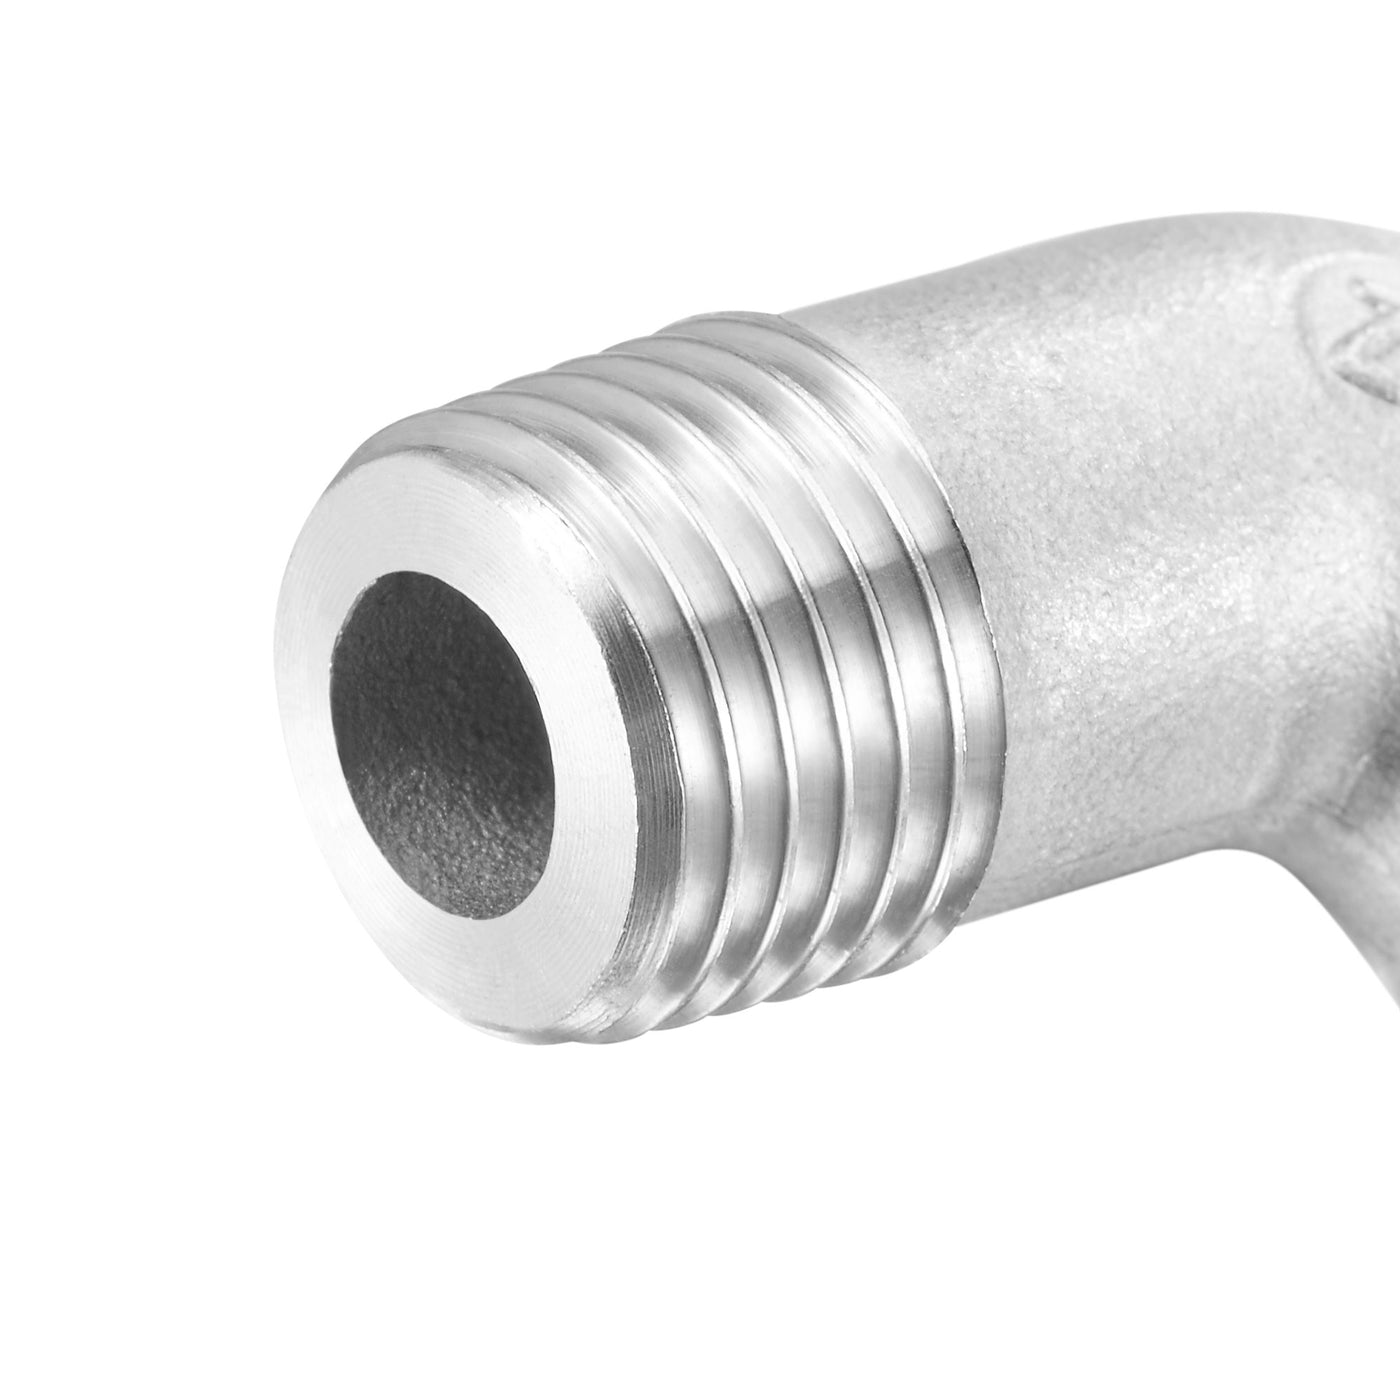 Uxcell Uxcell Stainless Steel Hose Barb Fitting Elbow 10mm x G1/4 Male Pipe Connector 2pcs